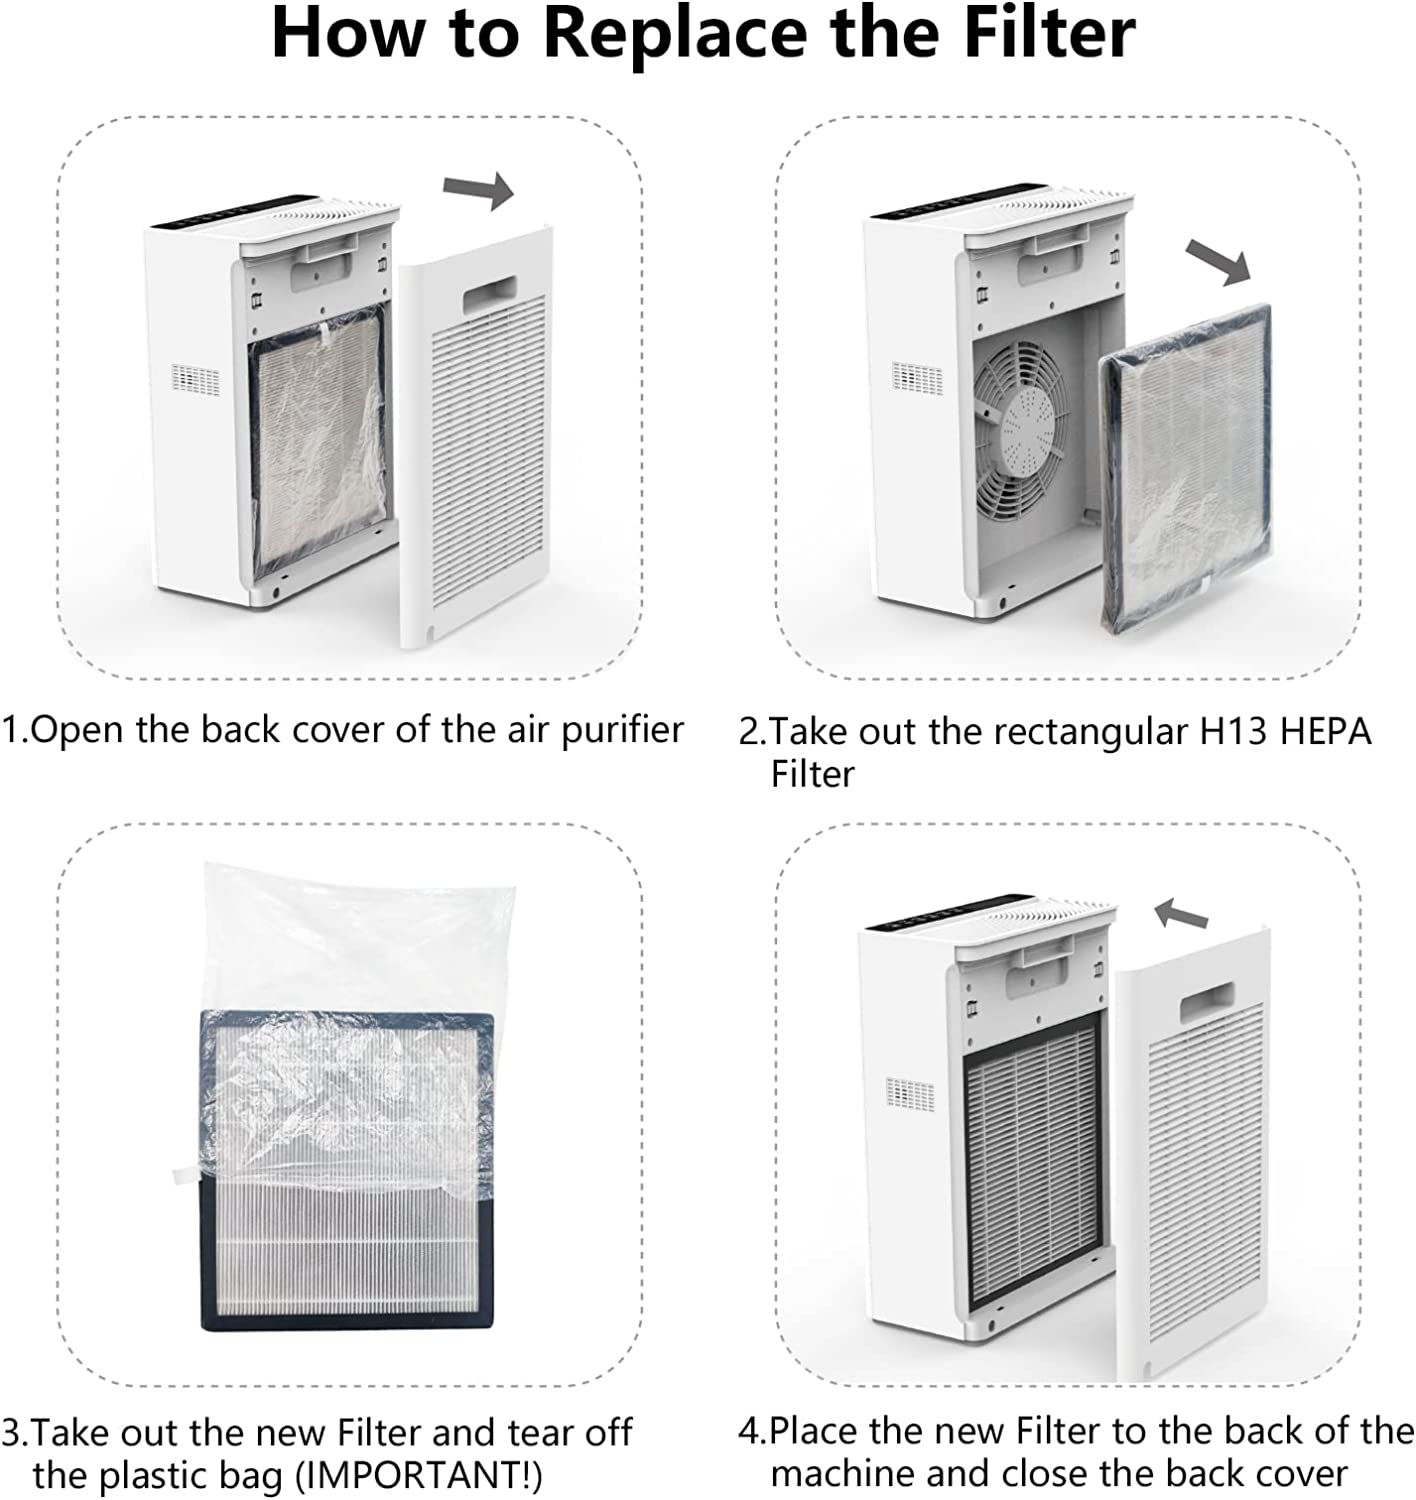 VEWIOR True HEPA Replacement Filter, Compatible A3 Air Purifier, H13 True HEPA Filter for A3 Air Cleaner Vewior